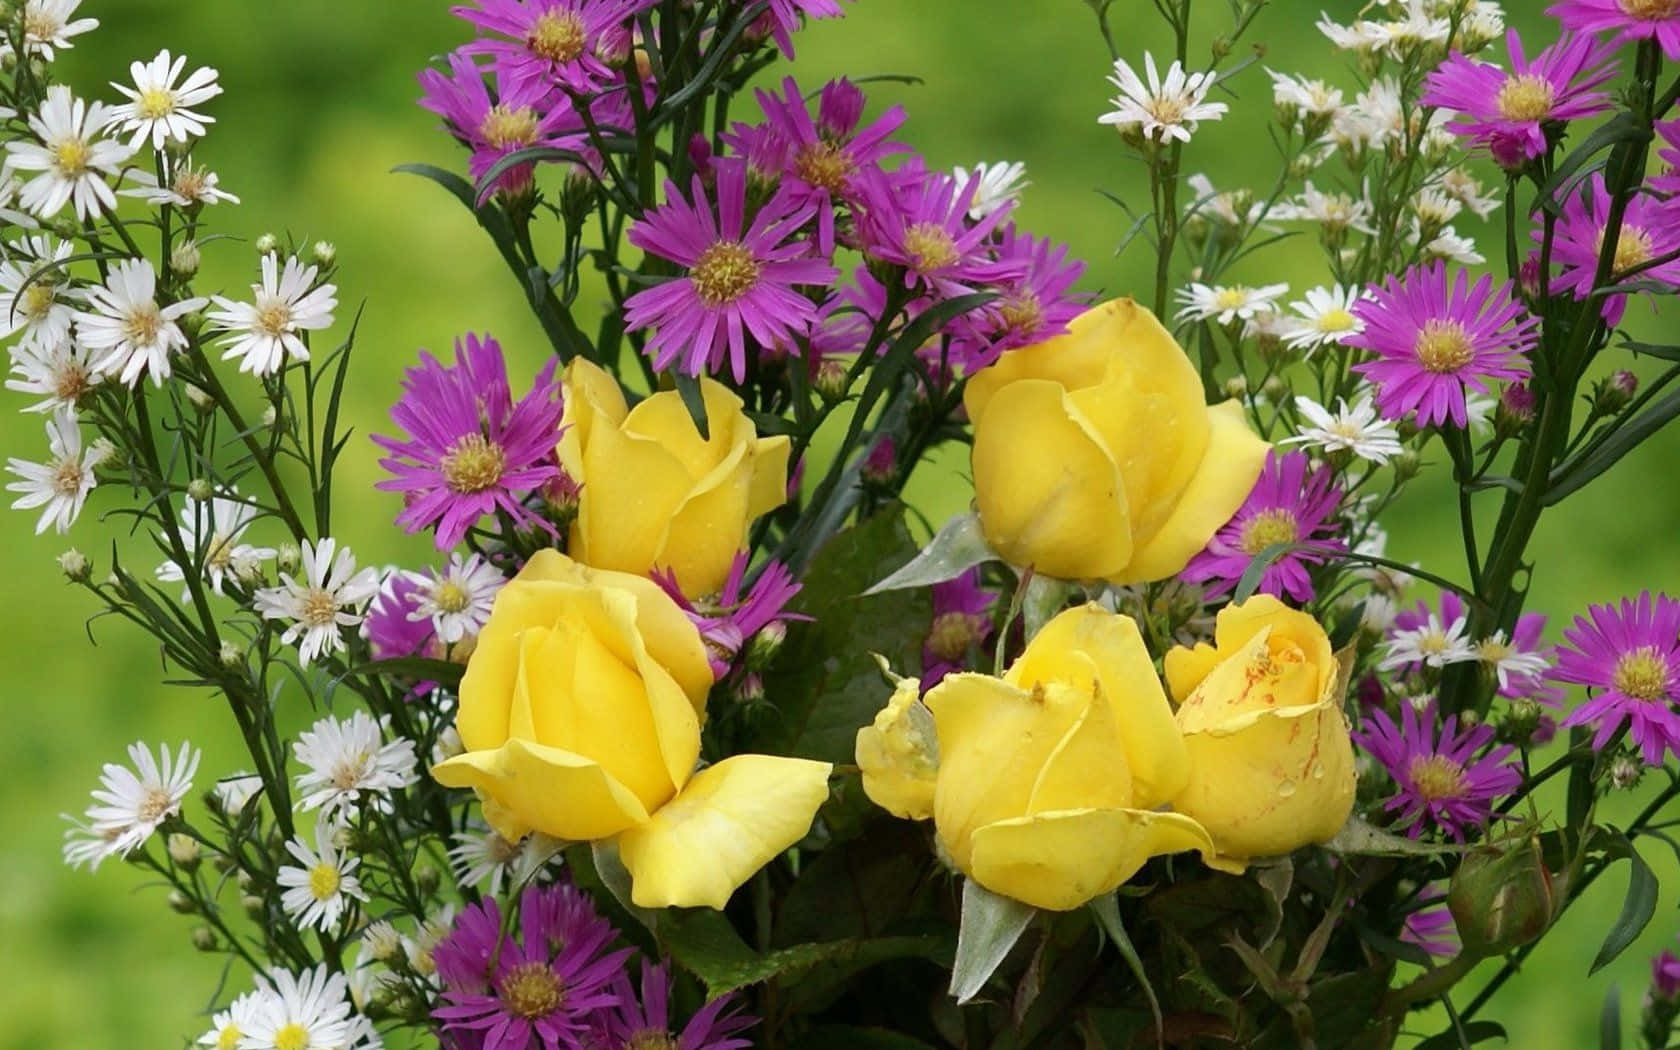 Yellow Roses And Purple Daisies In A Vase